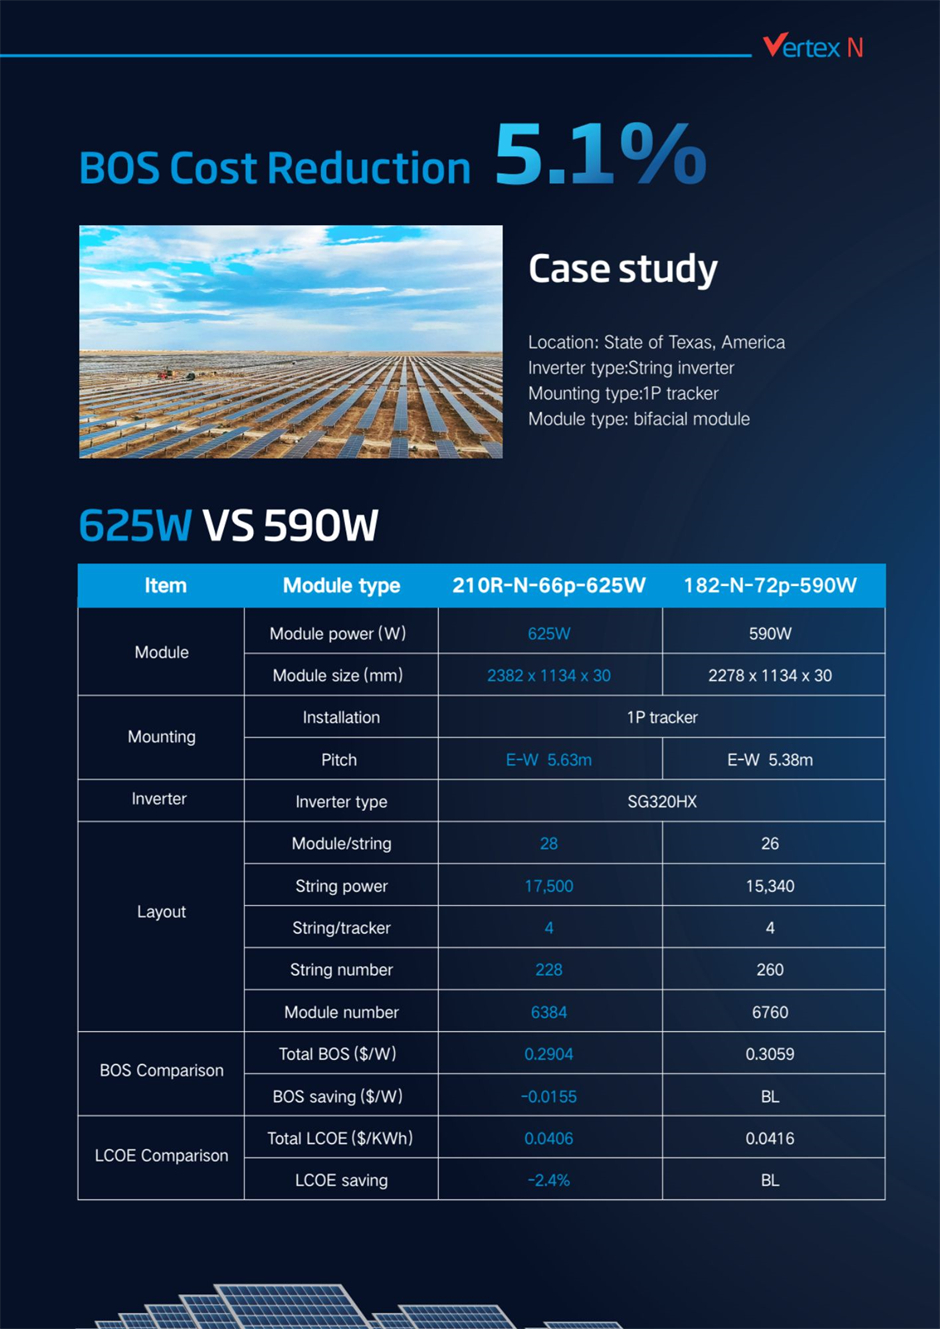 Trinasolar’s Vertex N 625W bifacial solar module has 5.1% lower BOS costs and 2.4% lower LCOE compared to similar modules, based on a case study with a 1-in-portrait solar tracking system.
 